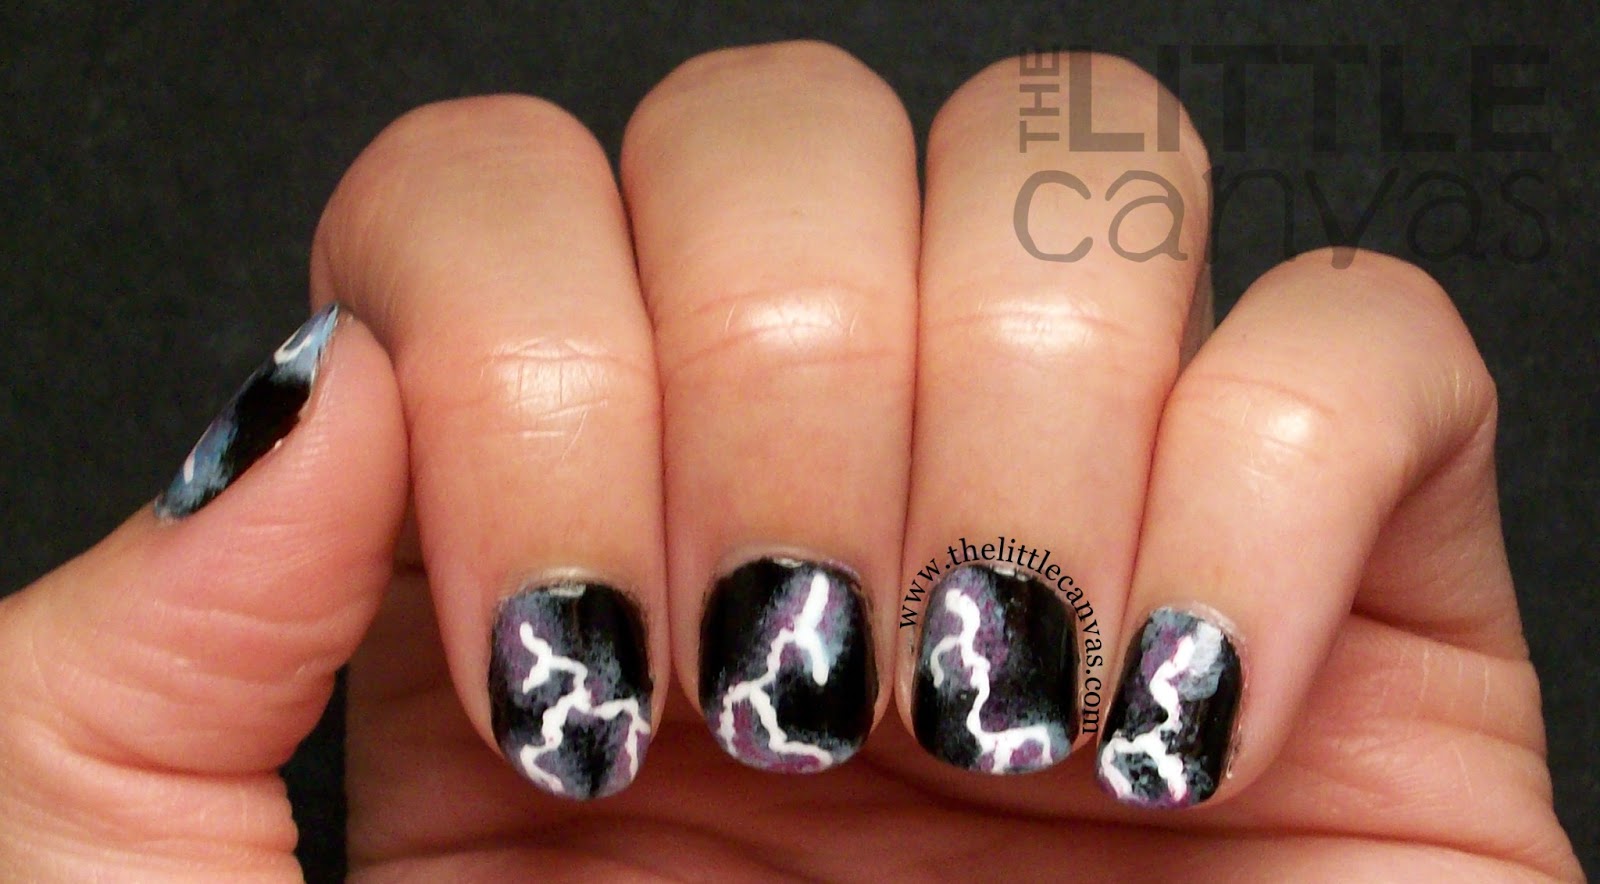 2. Nail Art with Cloud and Lightning Design - wide 3